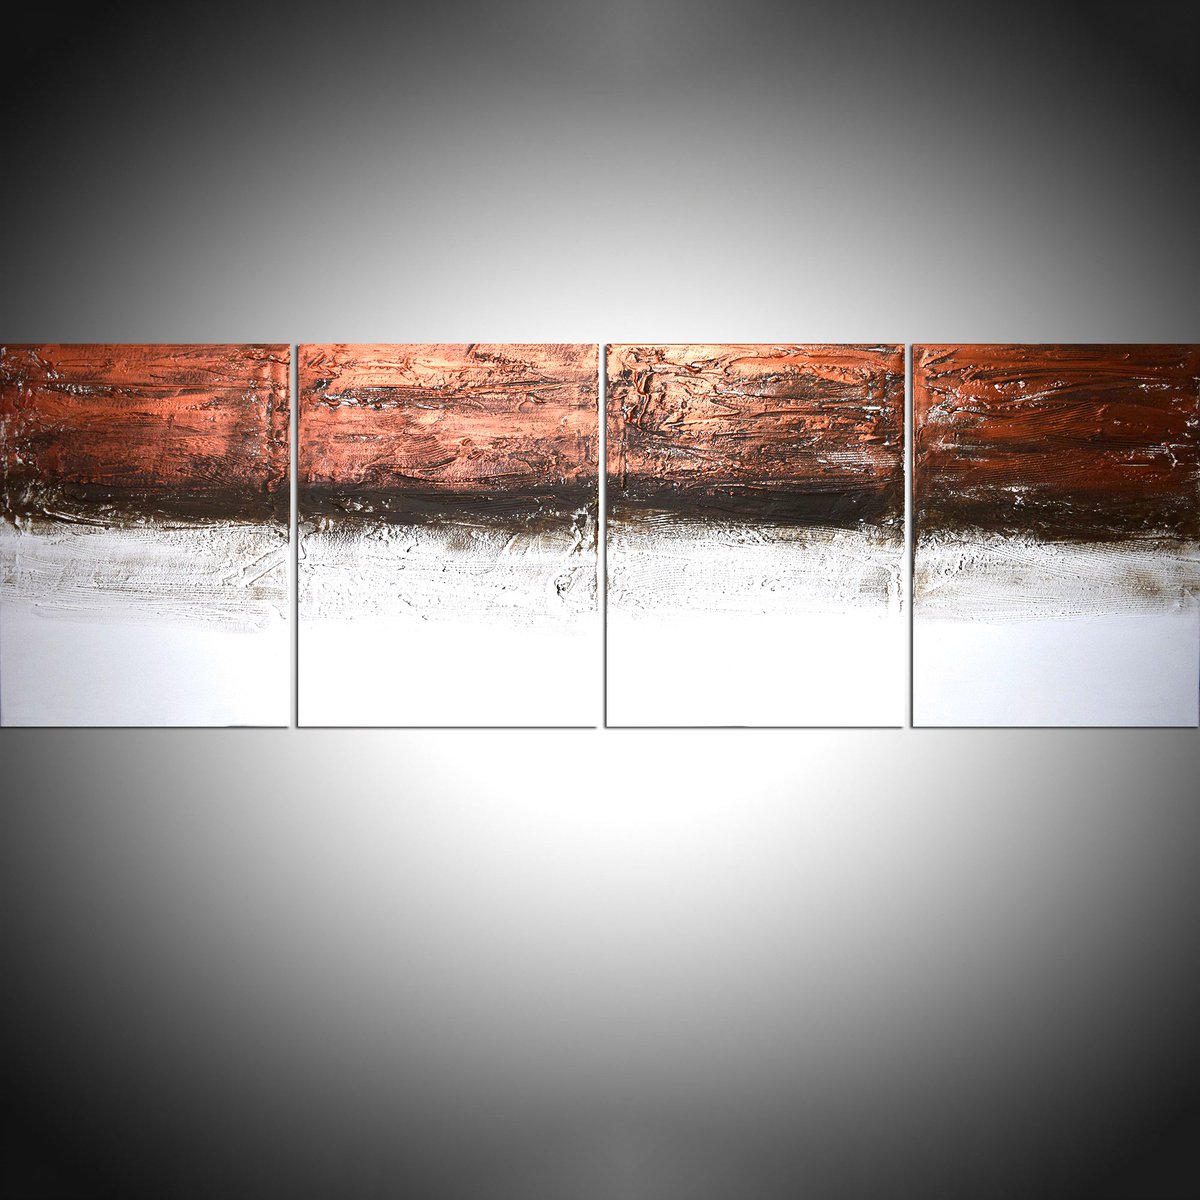 copper 4 piece quadriptych on canvas original and hand made tuppu.net/ff98b257 #painting #original #LatestPaintings